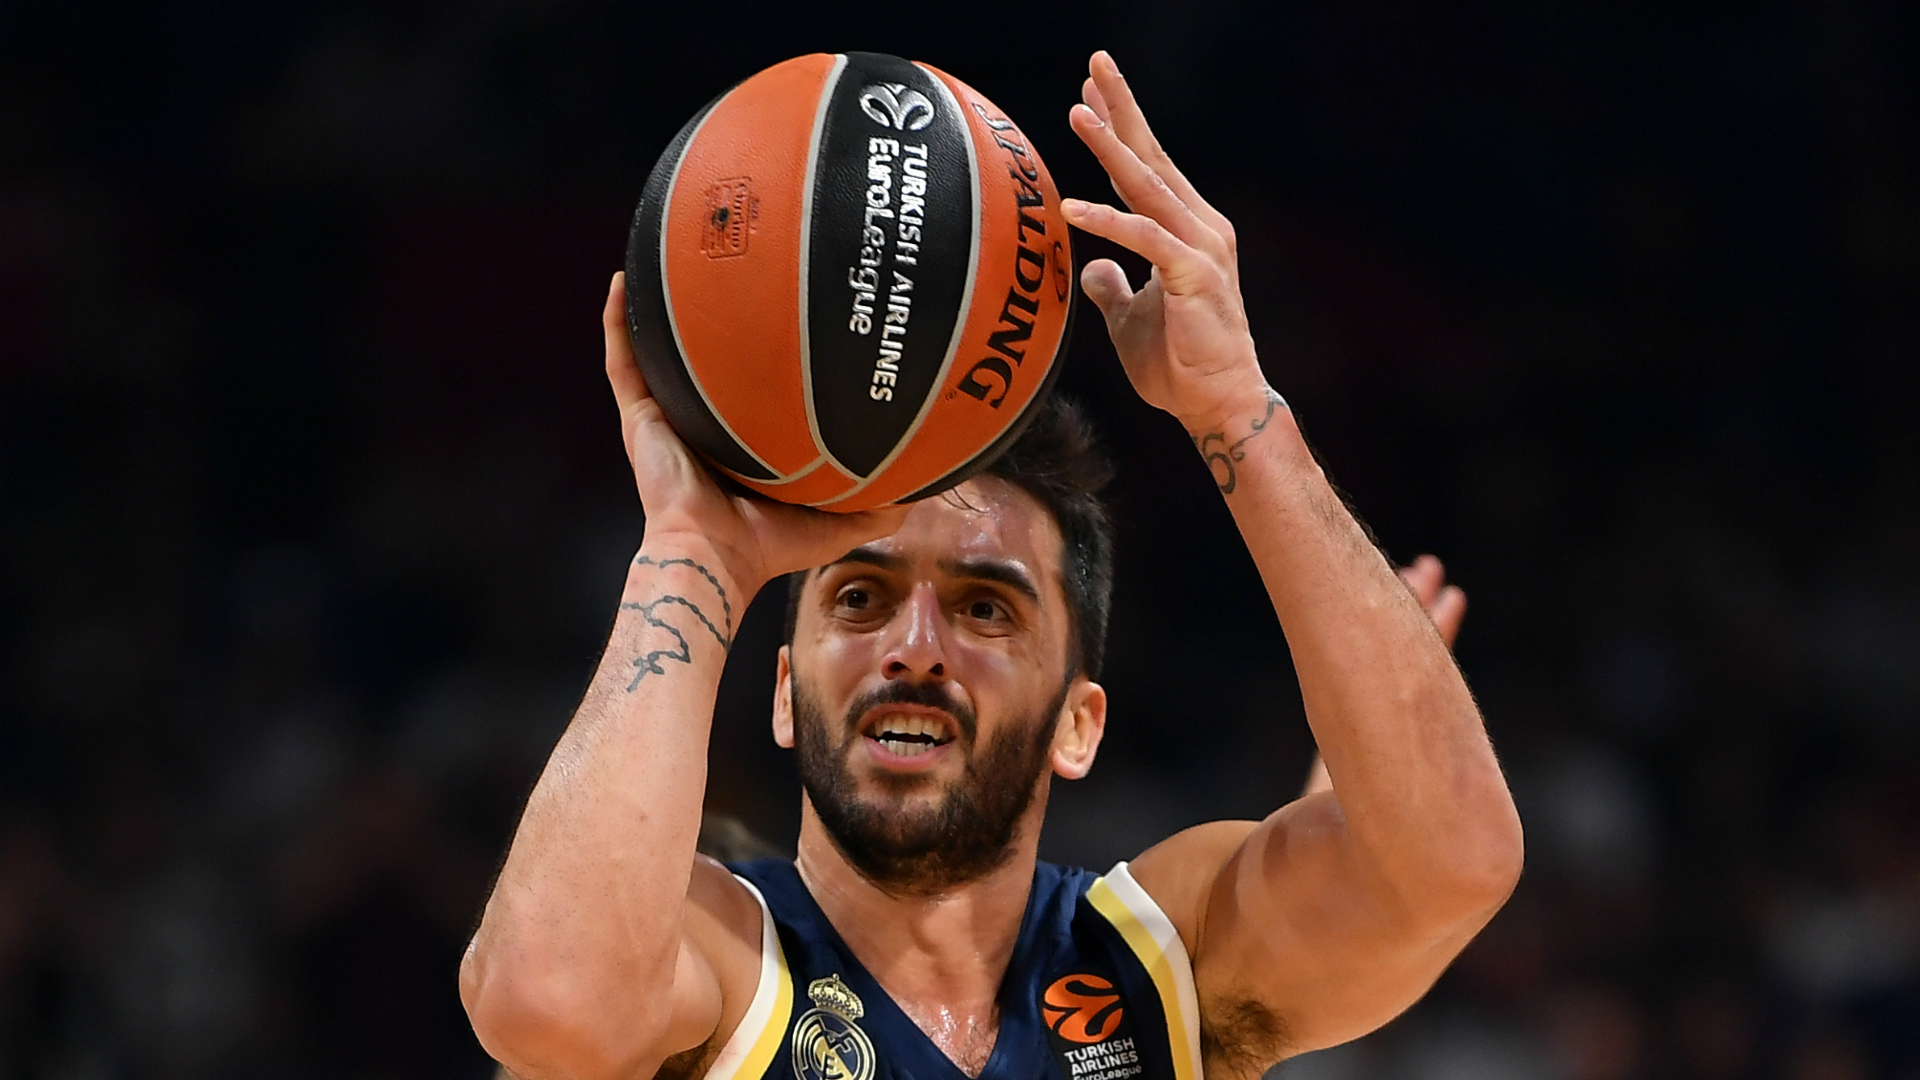 The EuroLeague was building towards its climax when the coronavirus pandemic struck, and now the 2019-20 season has been cancelled.